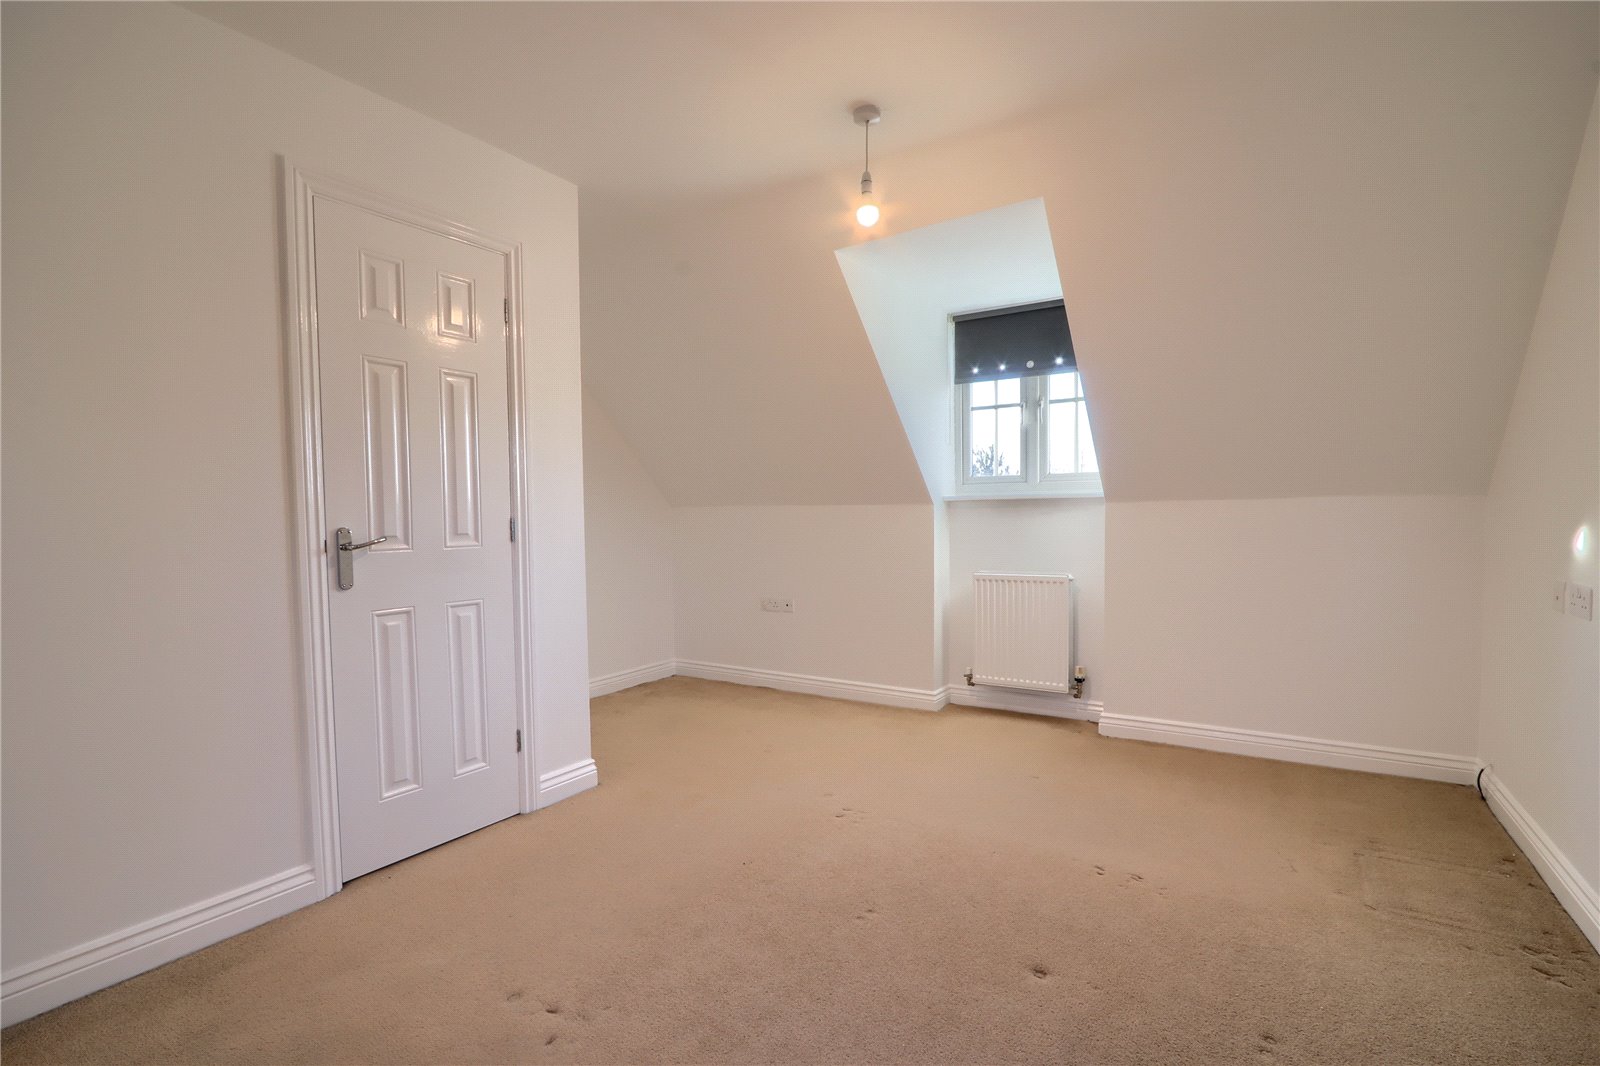 3 bed house for sale in Pennyroyal Road, Stockton-on-Tees  - Property Image 9